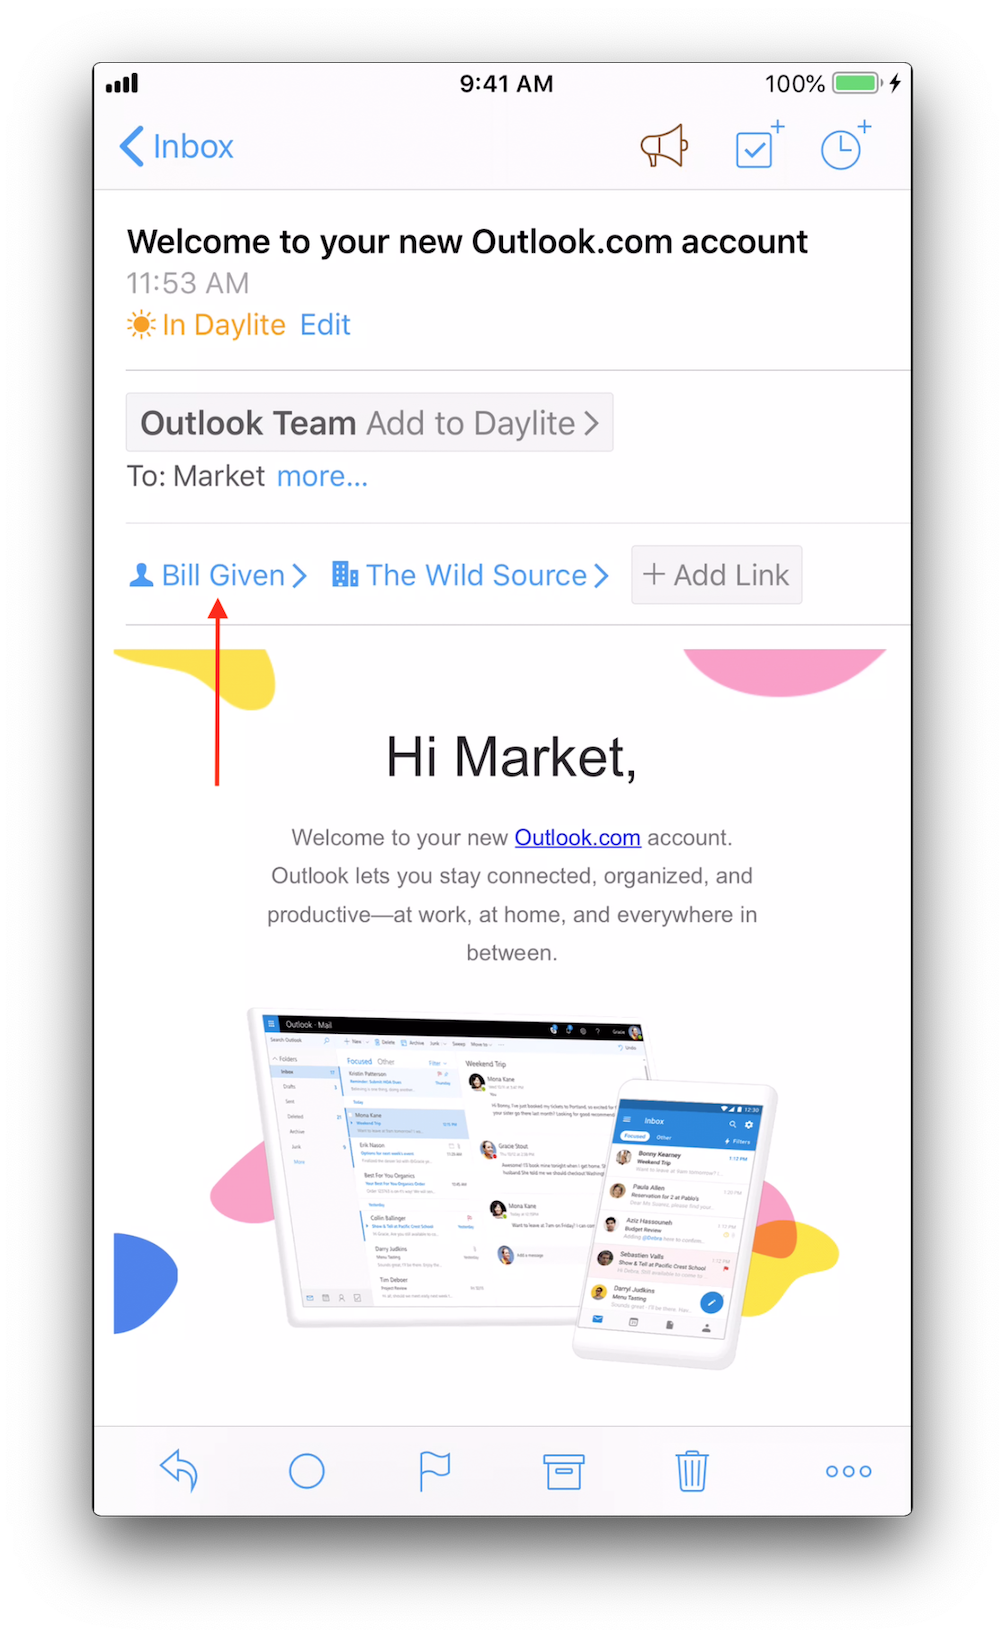 View of the Daylite Mail Inbox. One Email example is open and a linked Contact is highlighted.